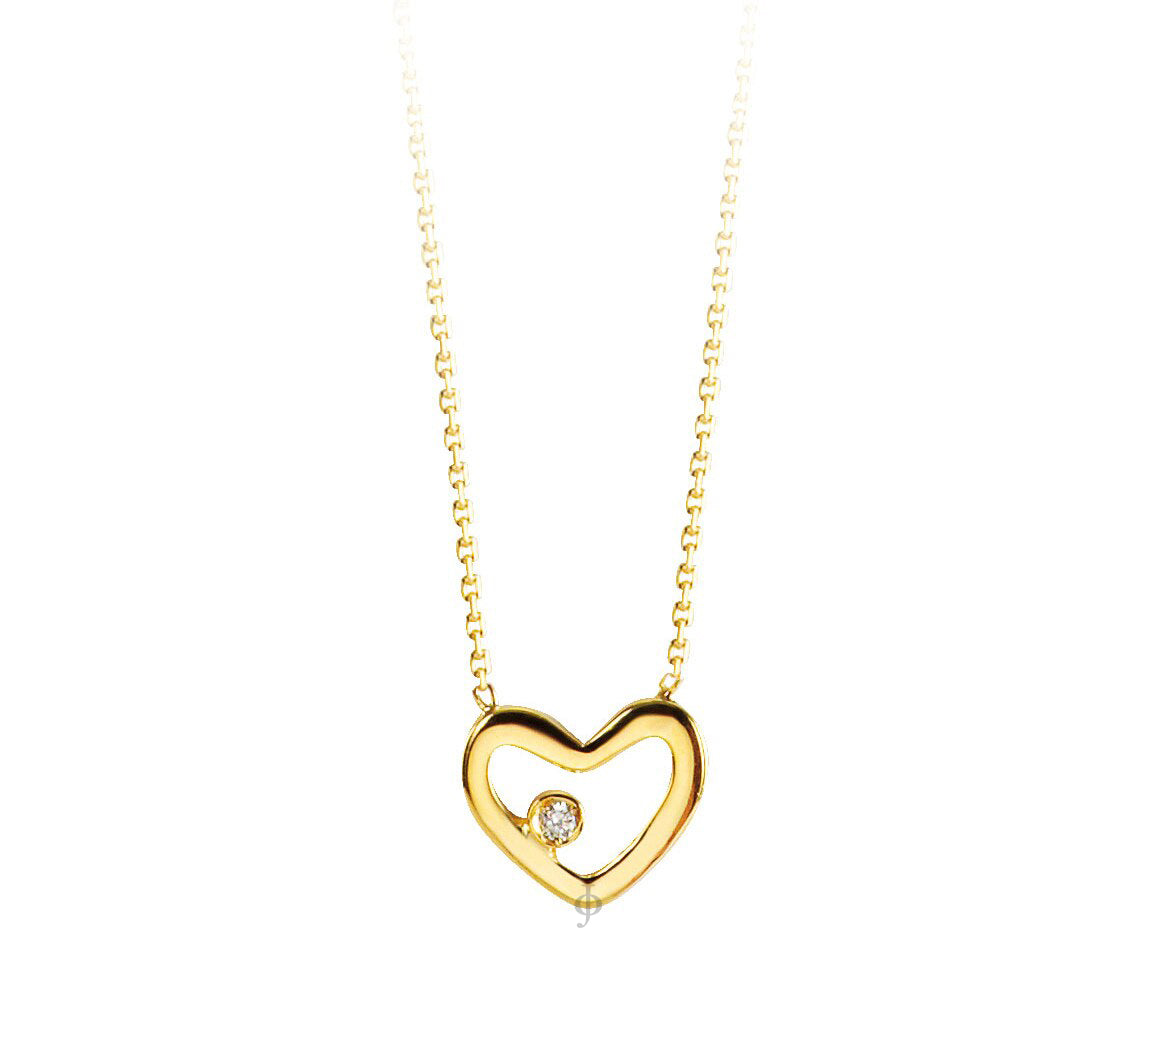 10K Yellow Gold Diamond Heart Necklace with Chain